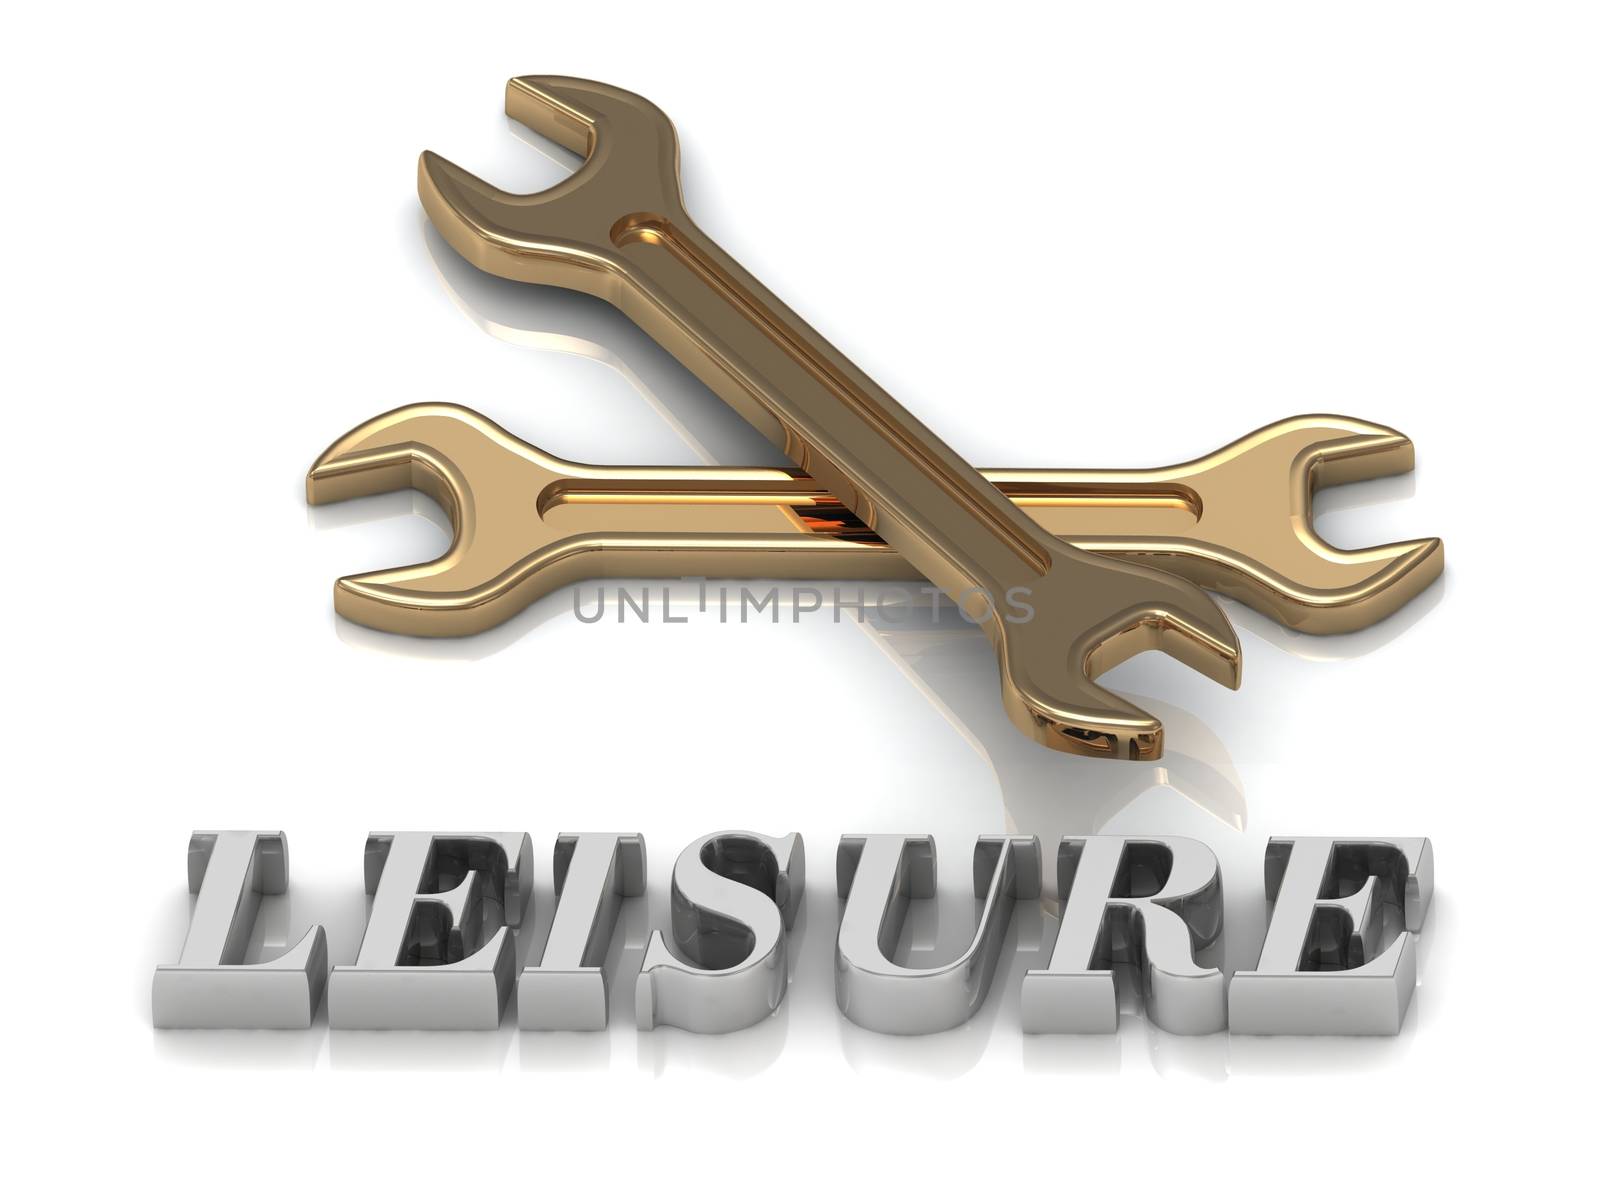 LEISURE- inscription of metal letters and 2 keys on white background